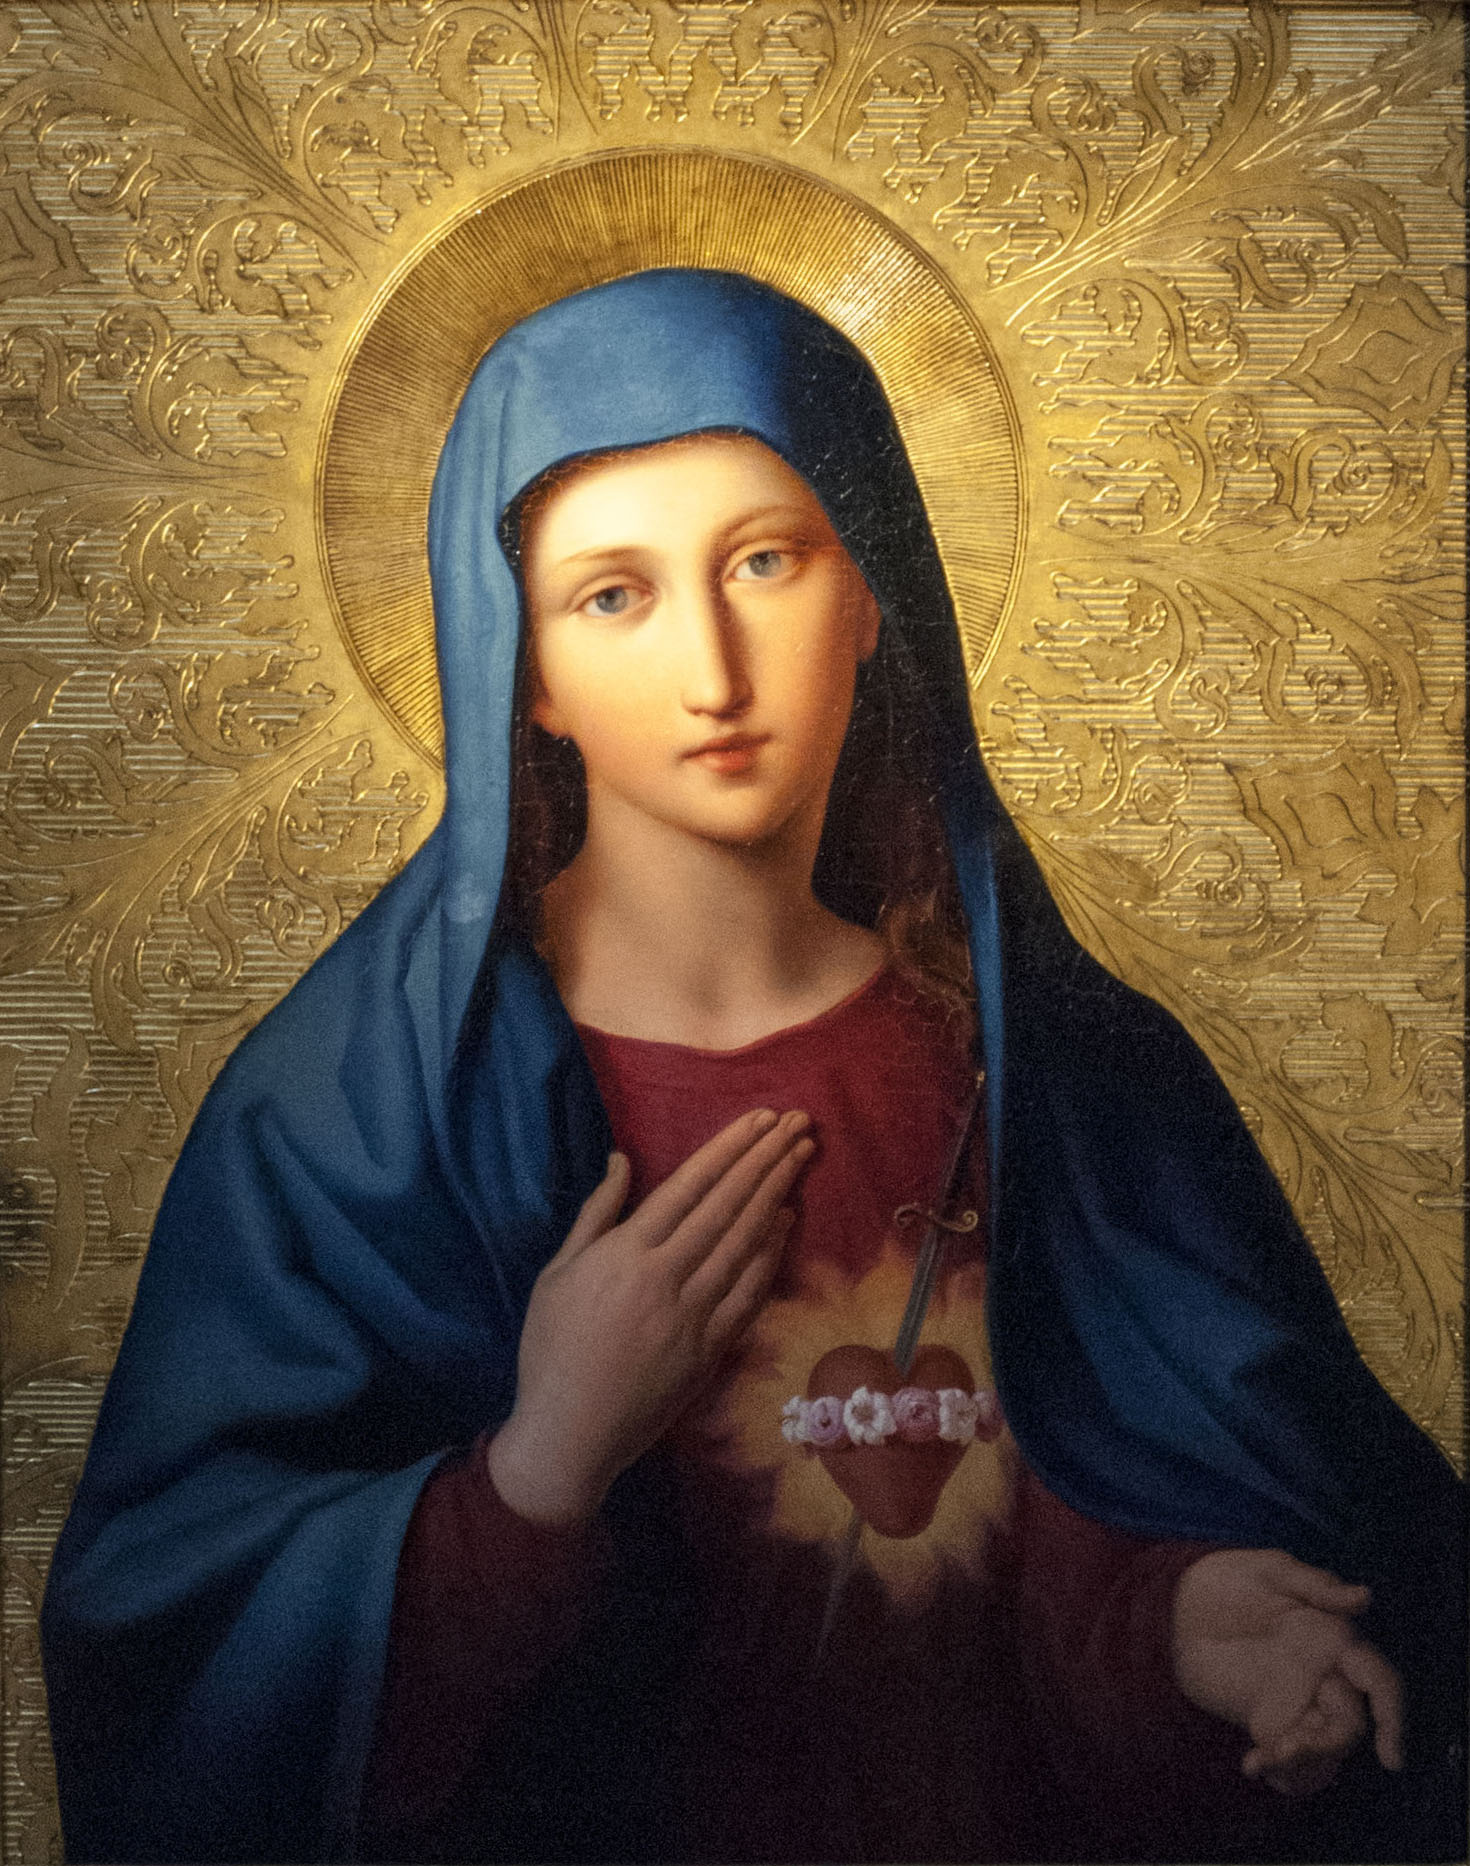 The Devotion to the Immaculate Heart of Mary: What Is It and Why Is It Important for our Spiritual Journey?